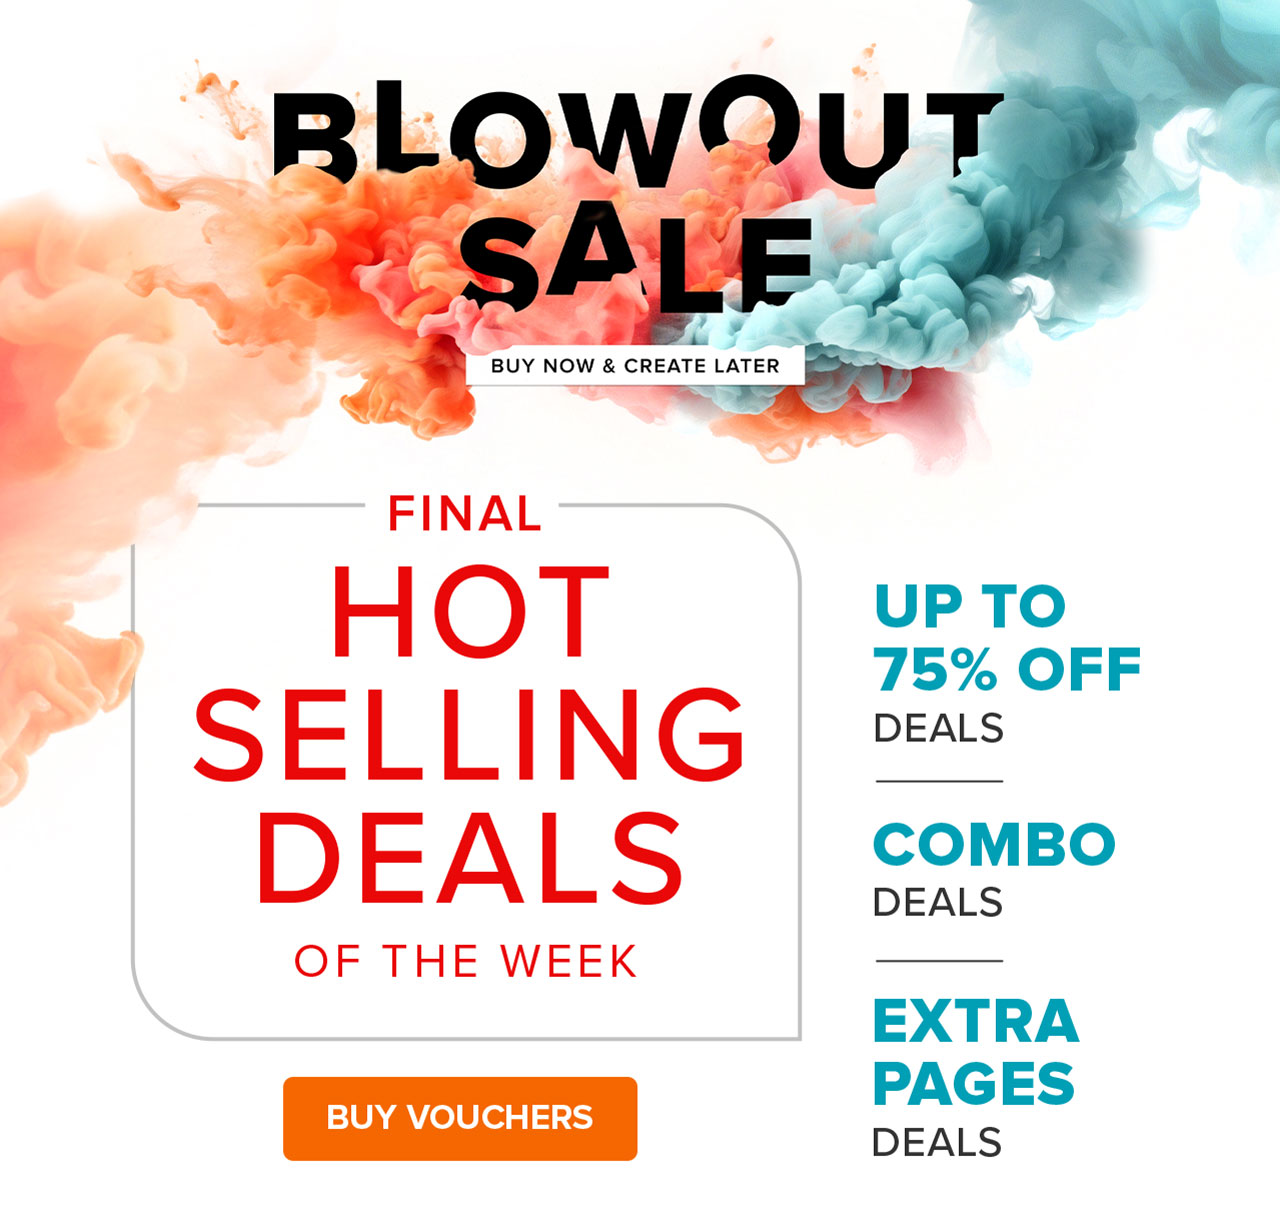 Final Hot Selling Deals of the Week | Buy Vouchers